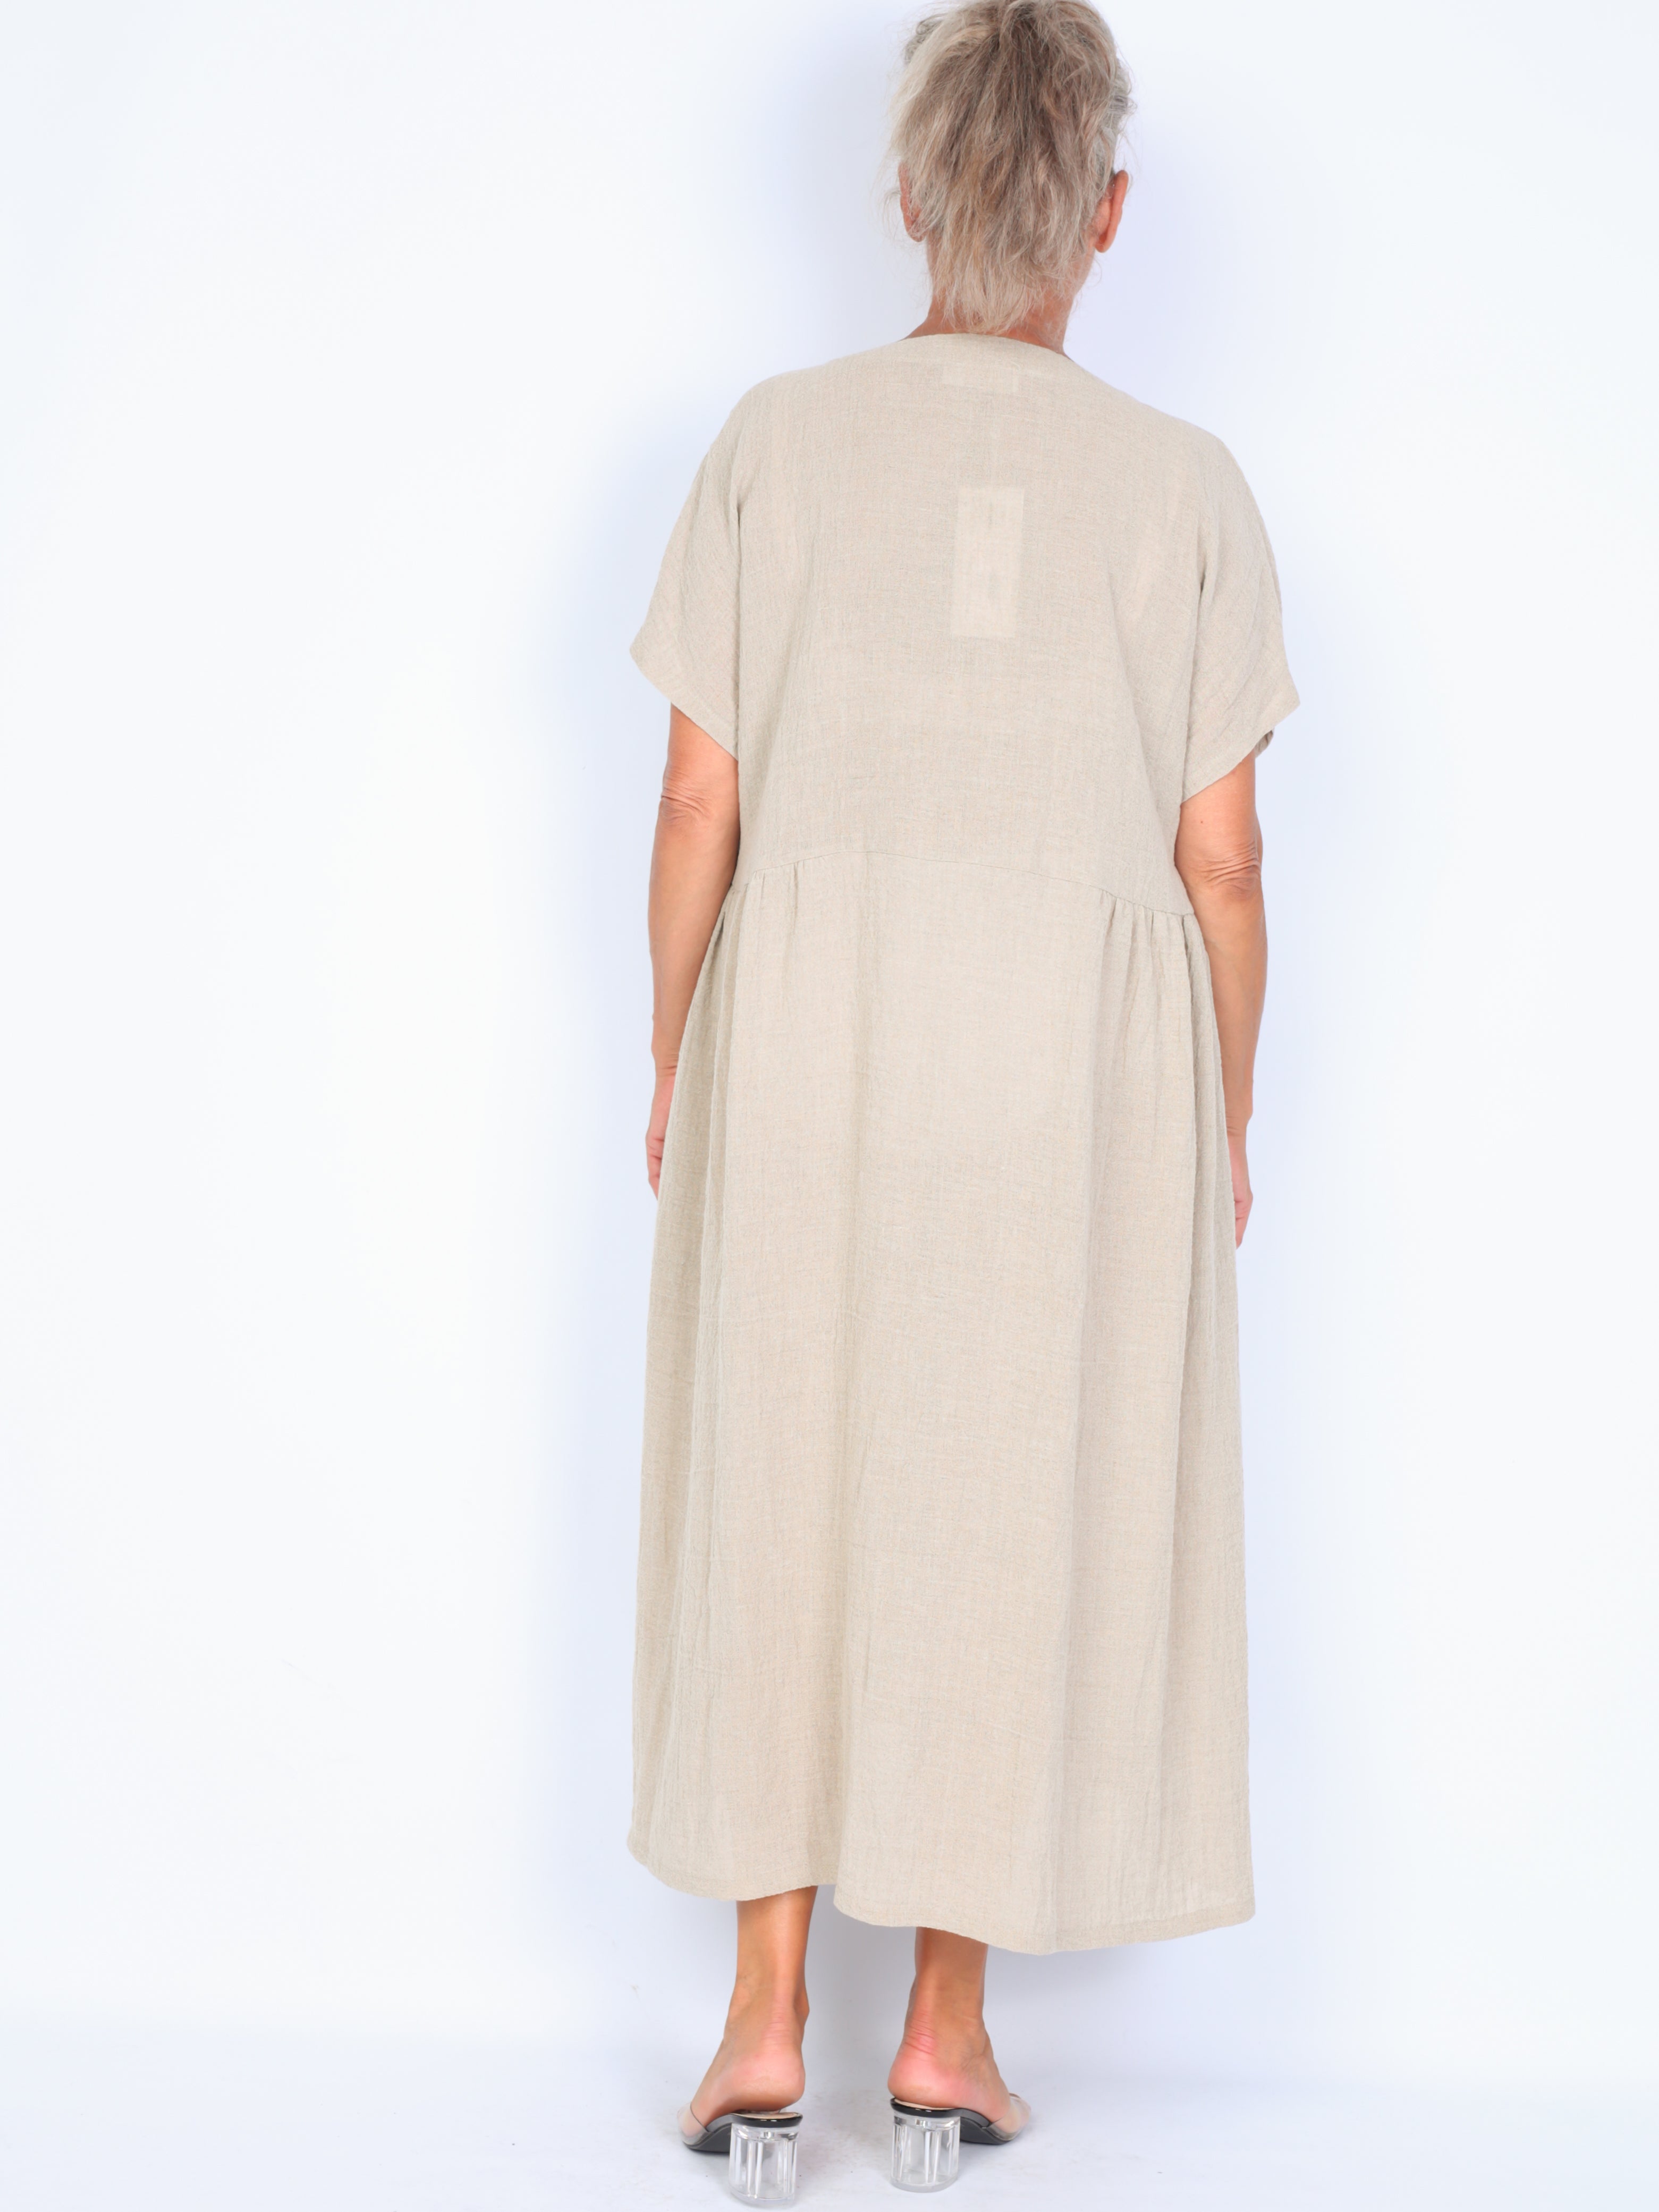 Some linen dress with buttons